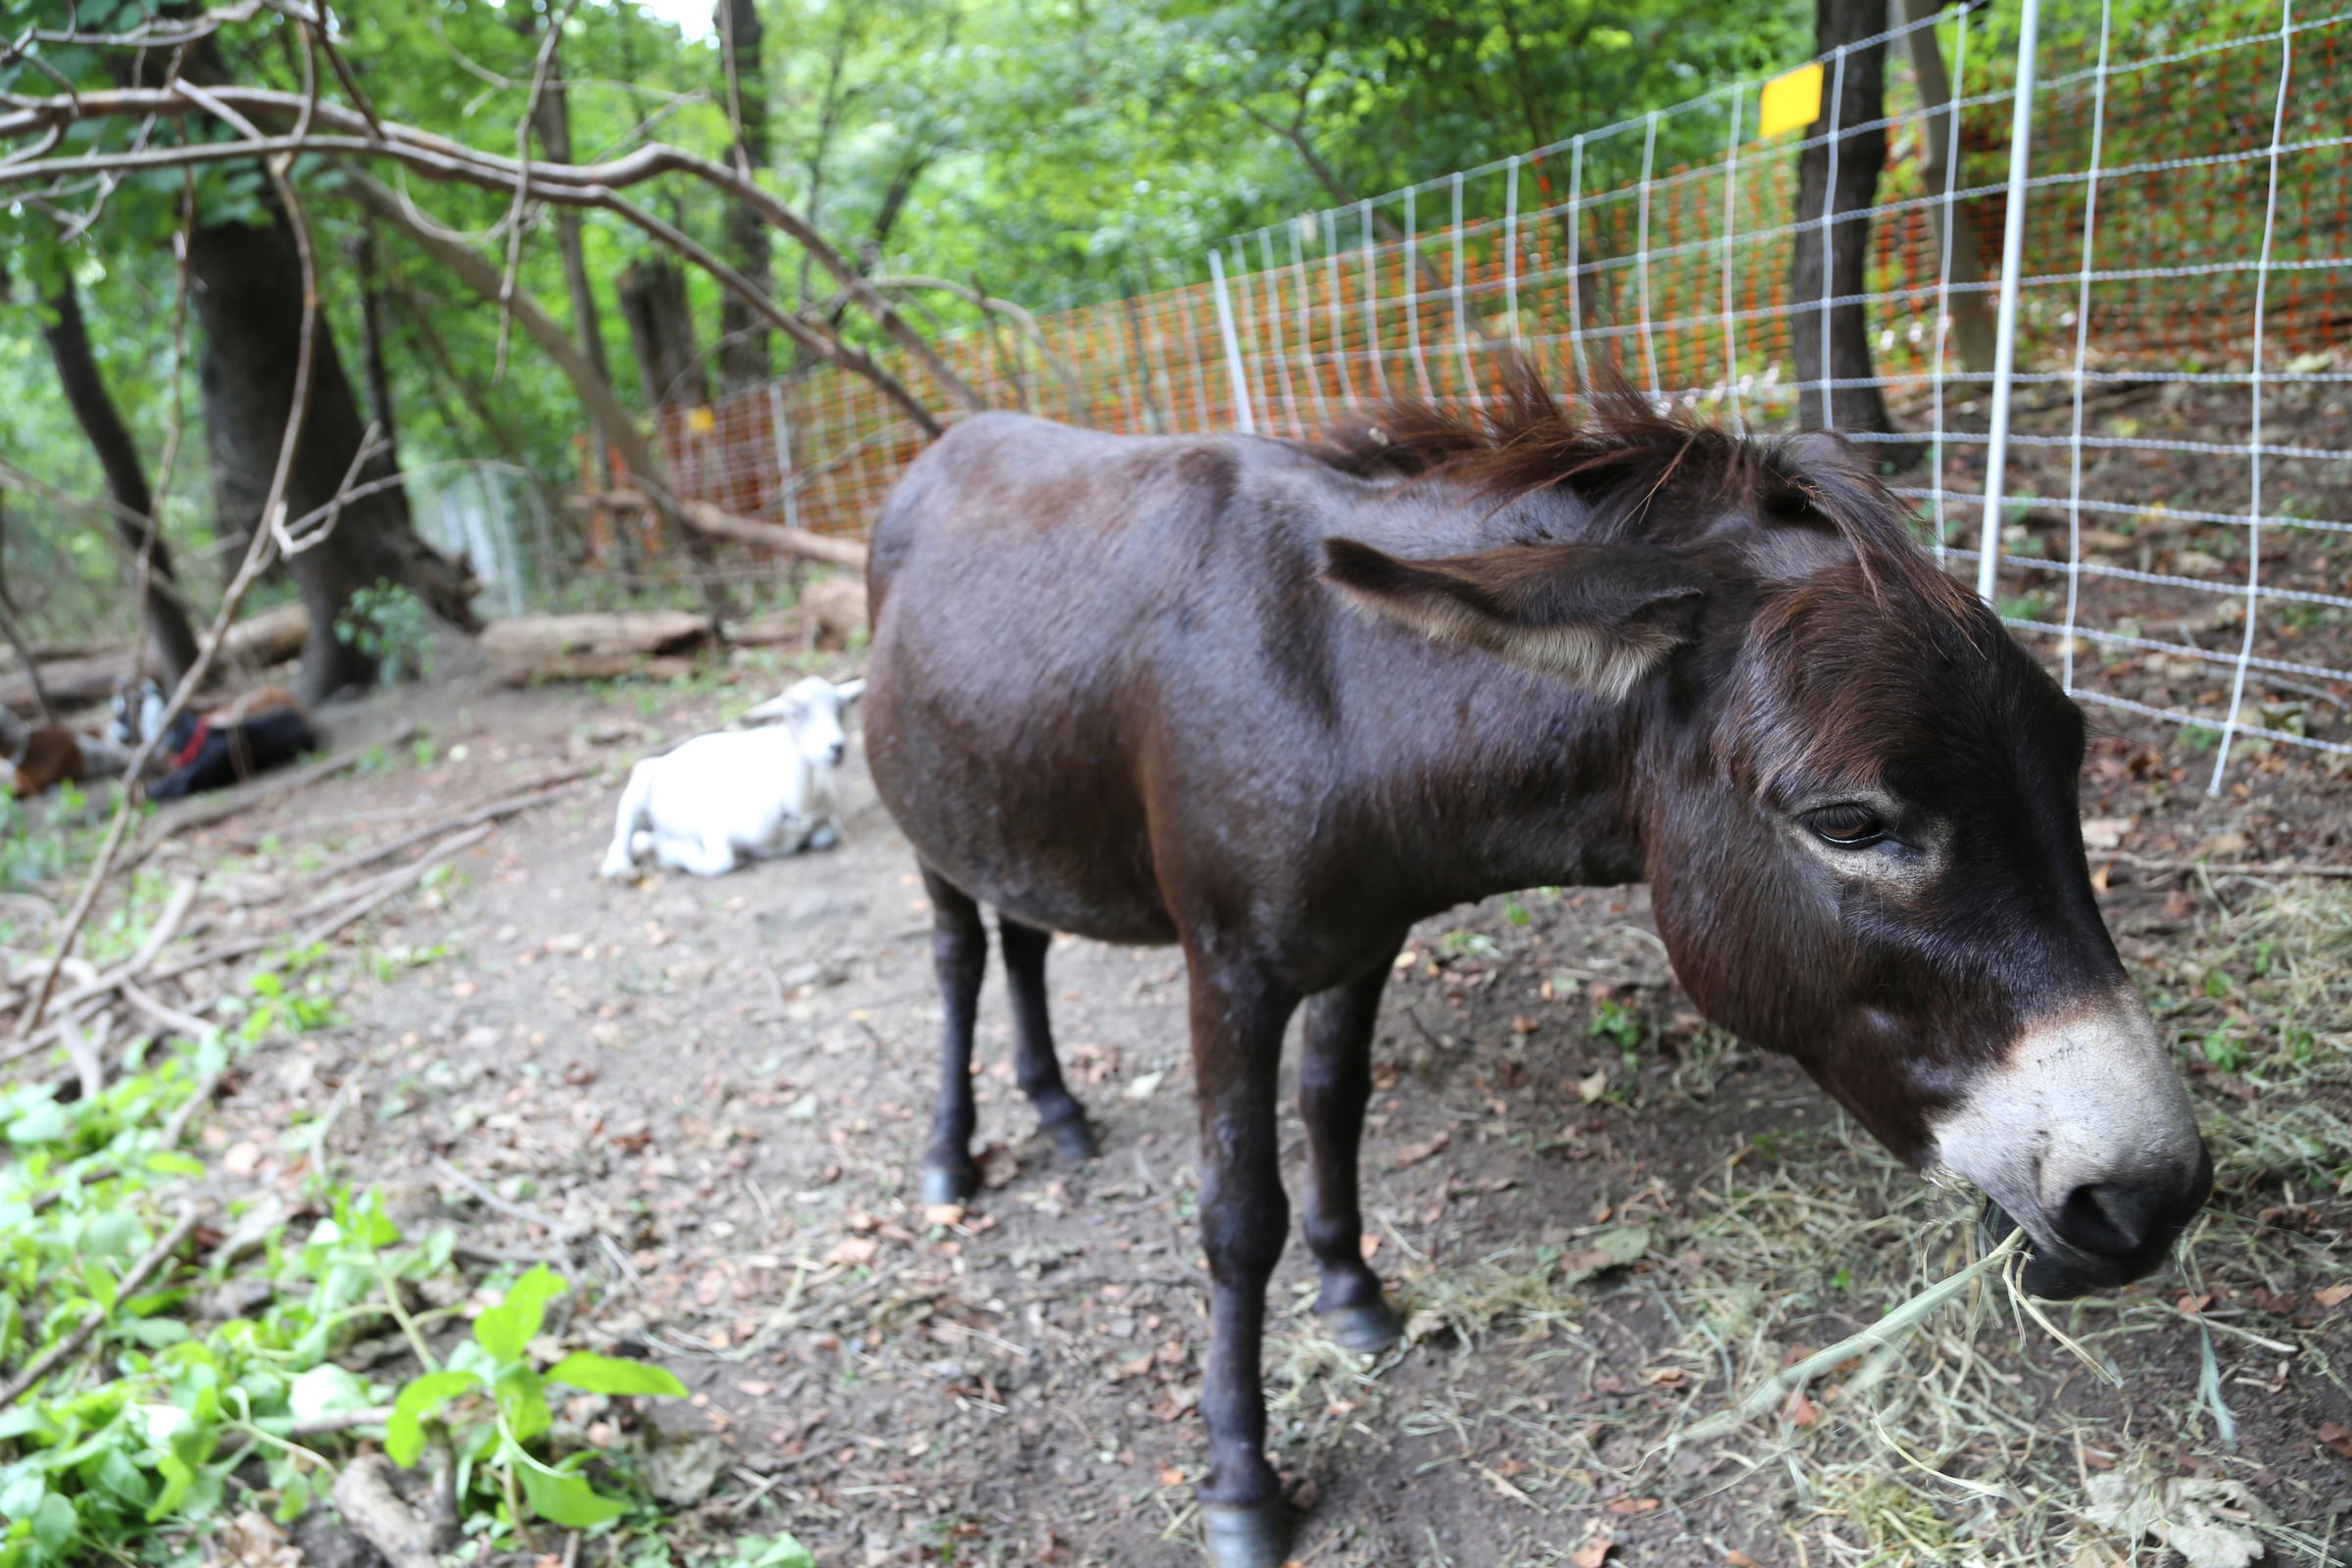 Pittsburgh's Greenest Landscapers Are 11 Goats And A Donkey | 90.5 WESA